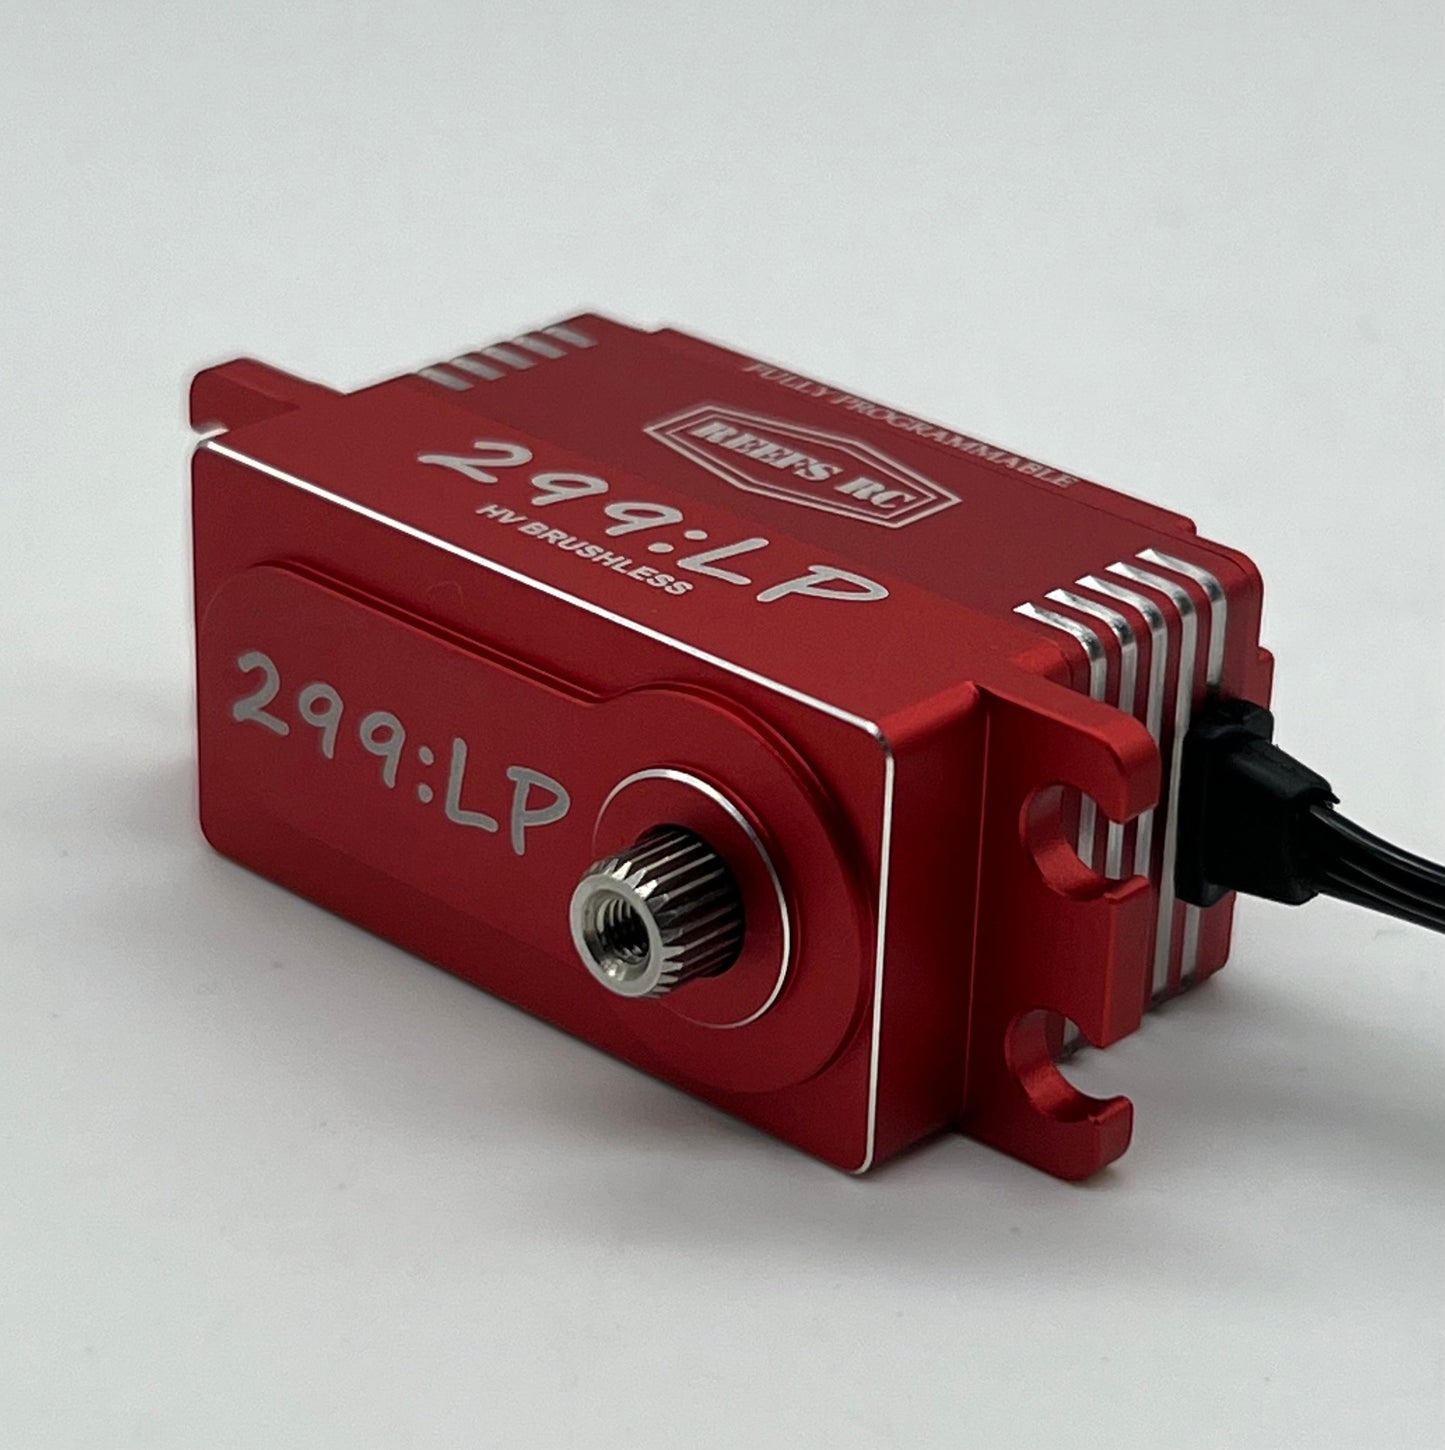 Reefs RC 299LP Racing Servo (Special Edition Red)